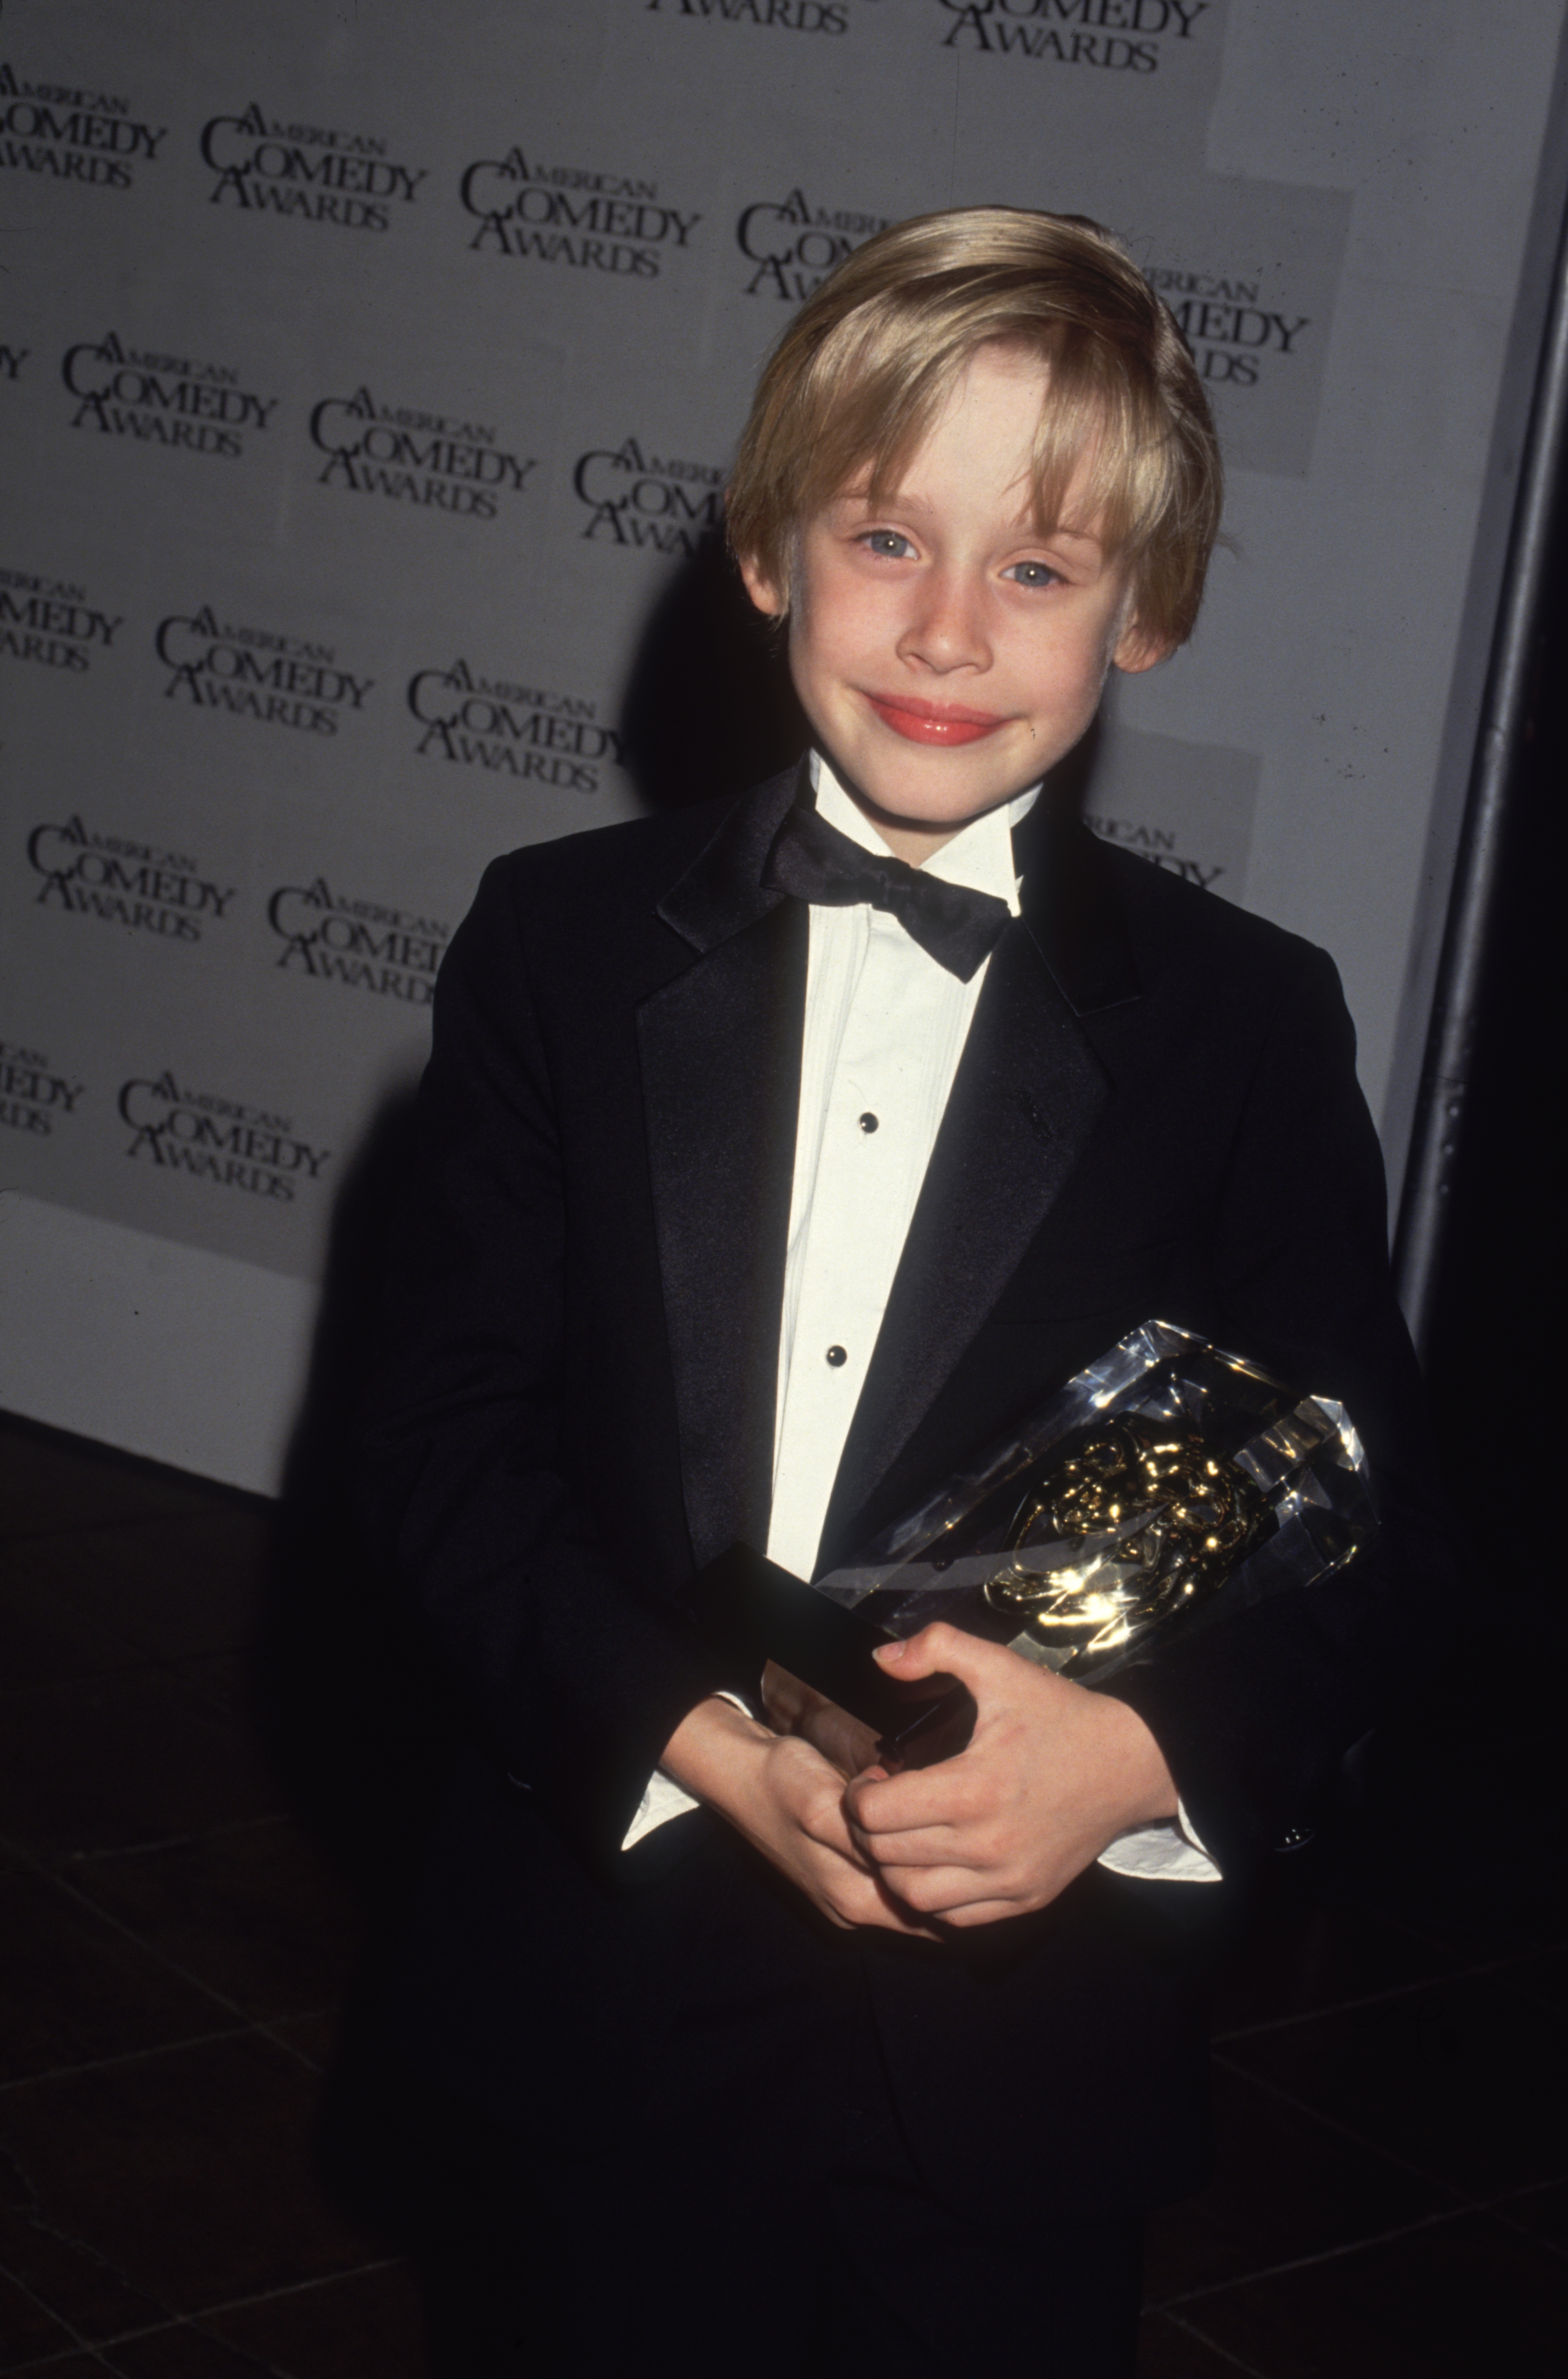 Macaulay Culkin at the American Comedy Awards in 1991. | Source: Getty Images